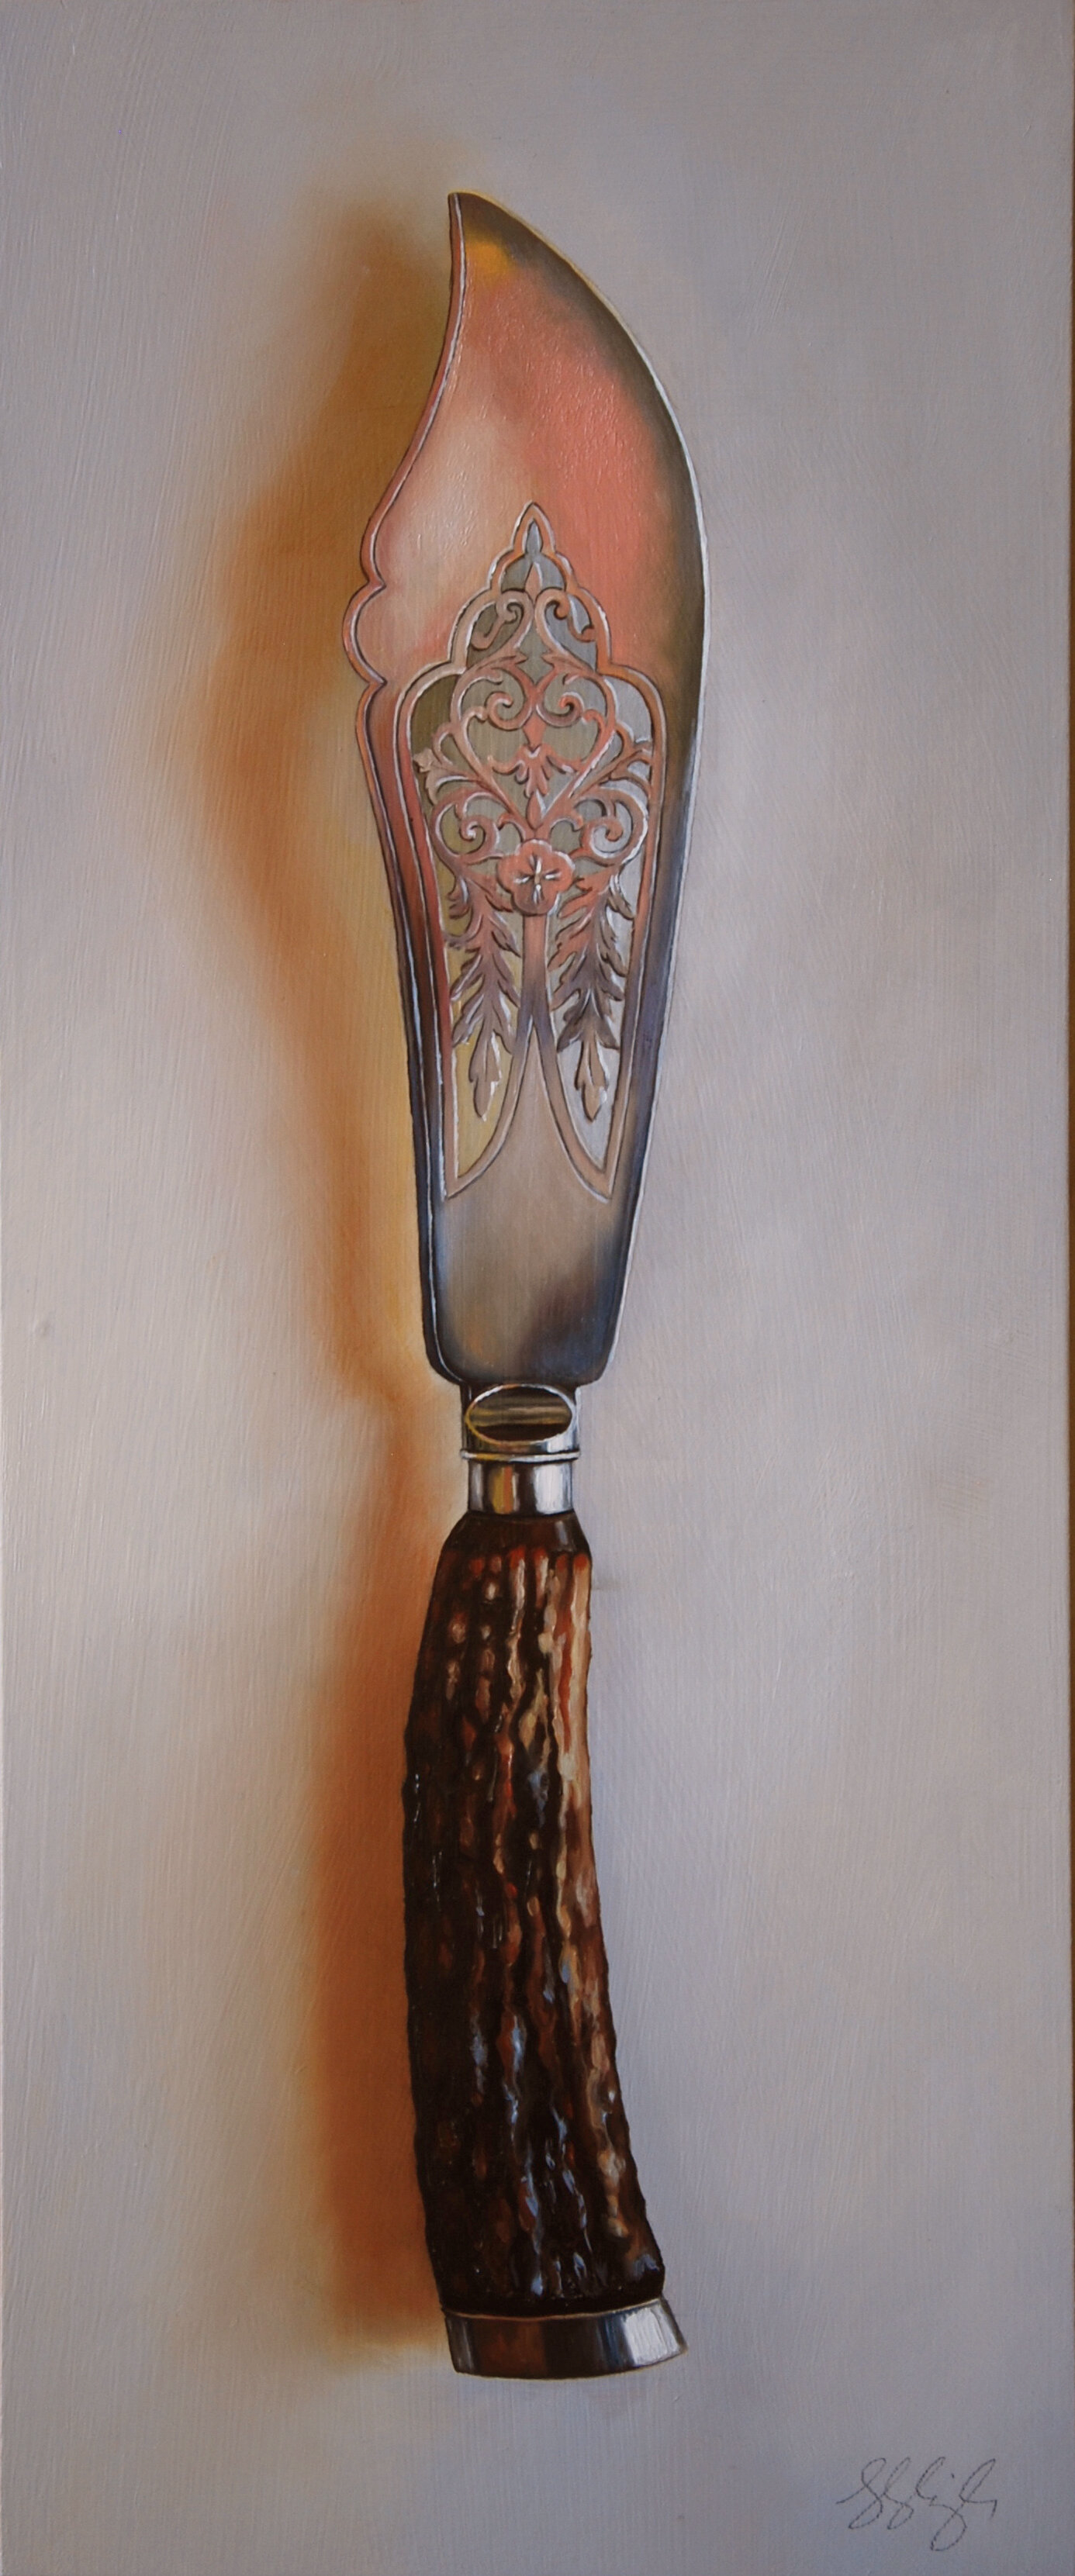   Silver Server #17, The Dandy  Oil on panel, 2020. 15.5x6.5” 